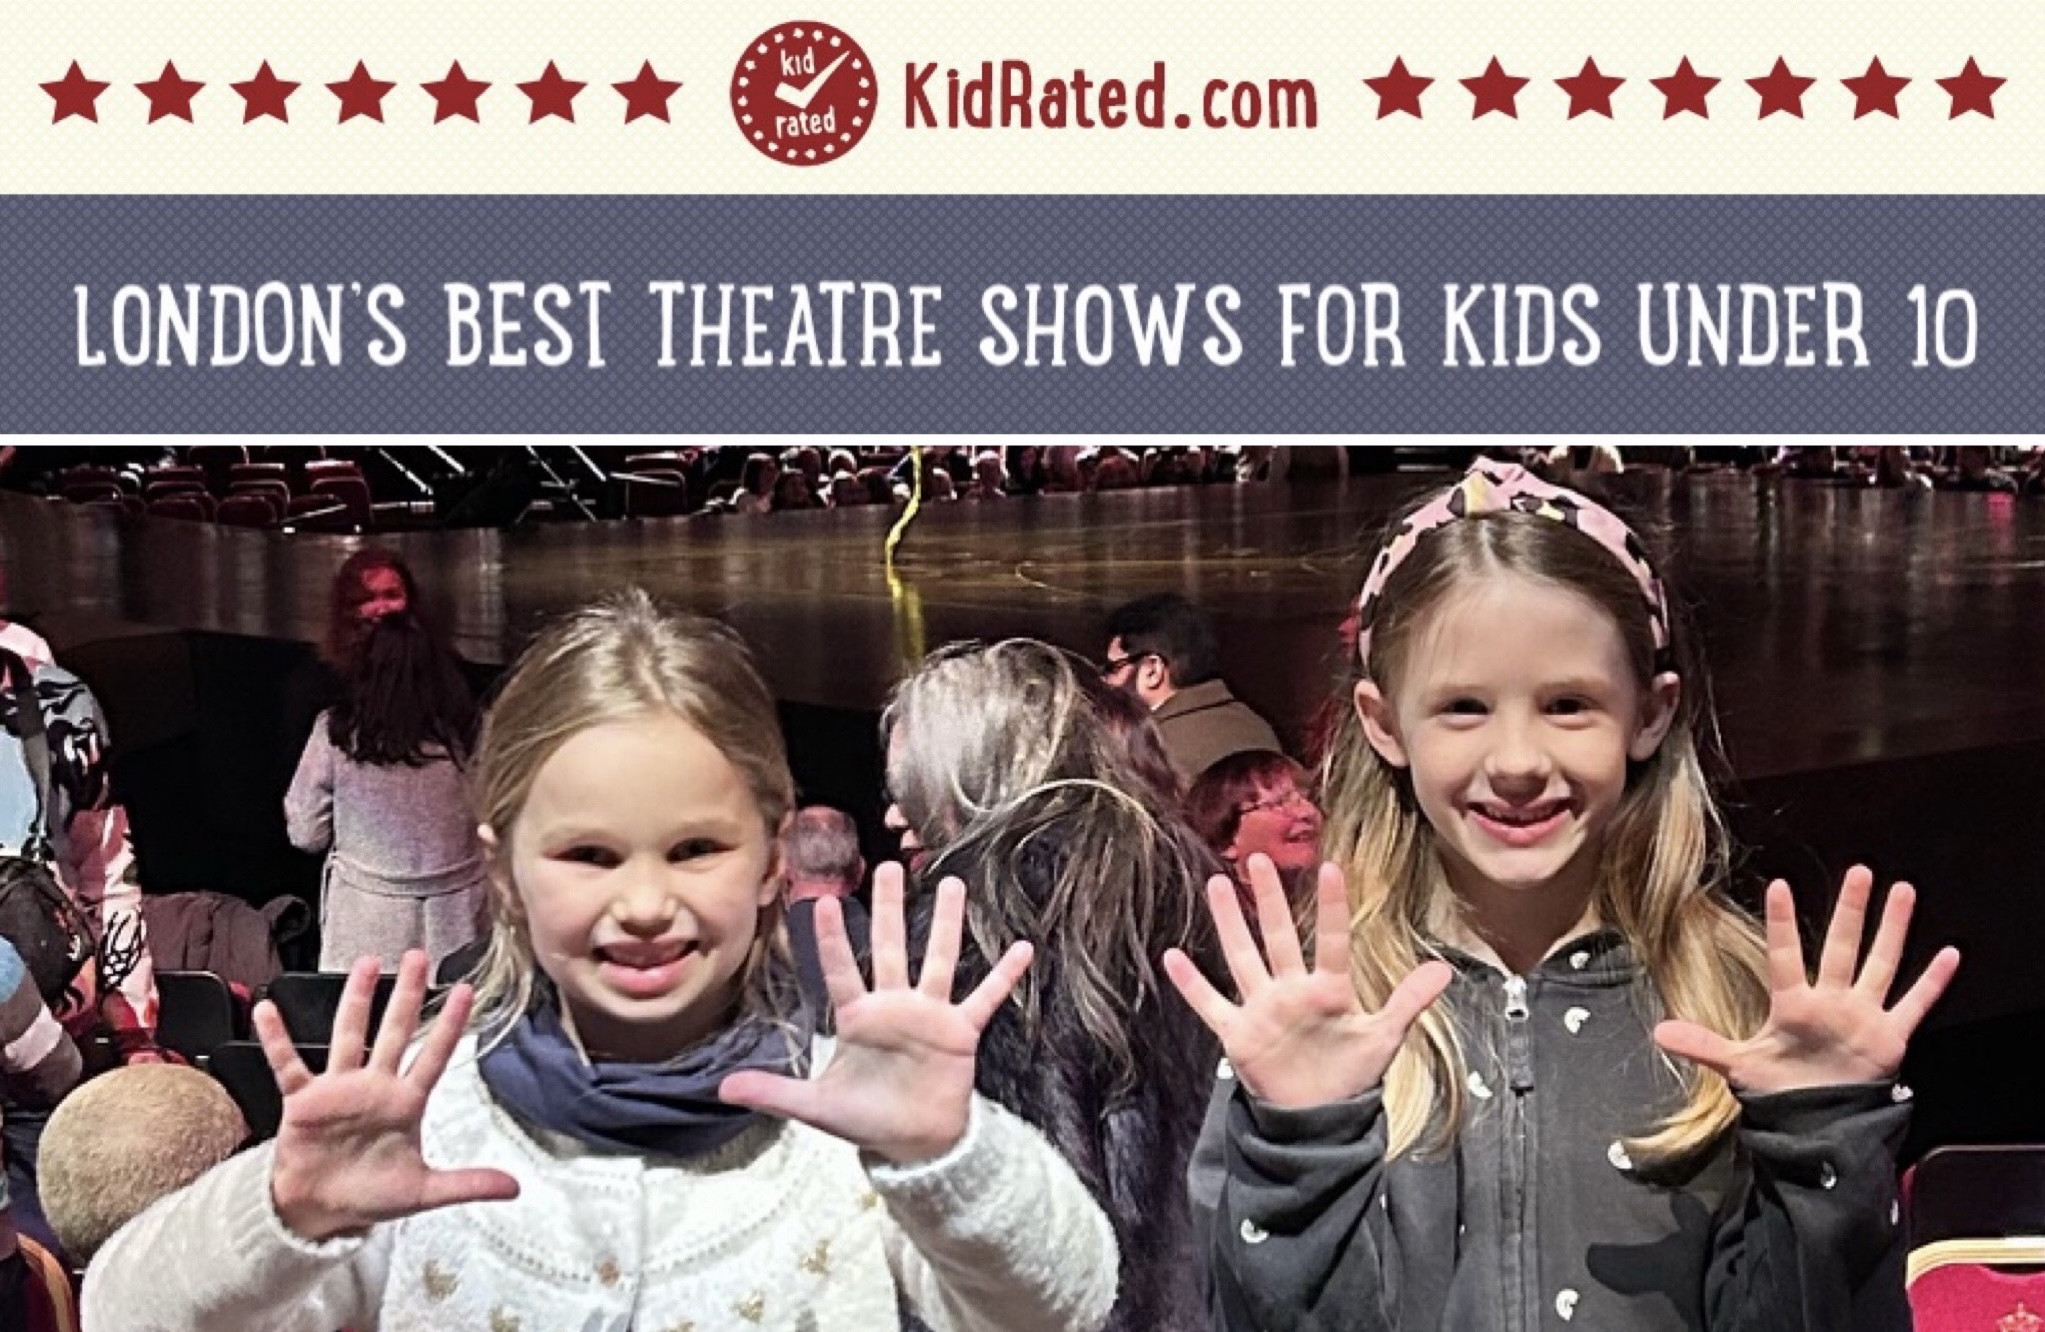 KidRated's pick of London' Best Theatre Shows for Kids under 10.